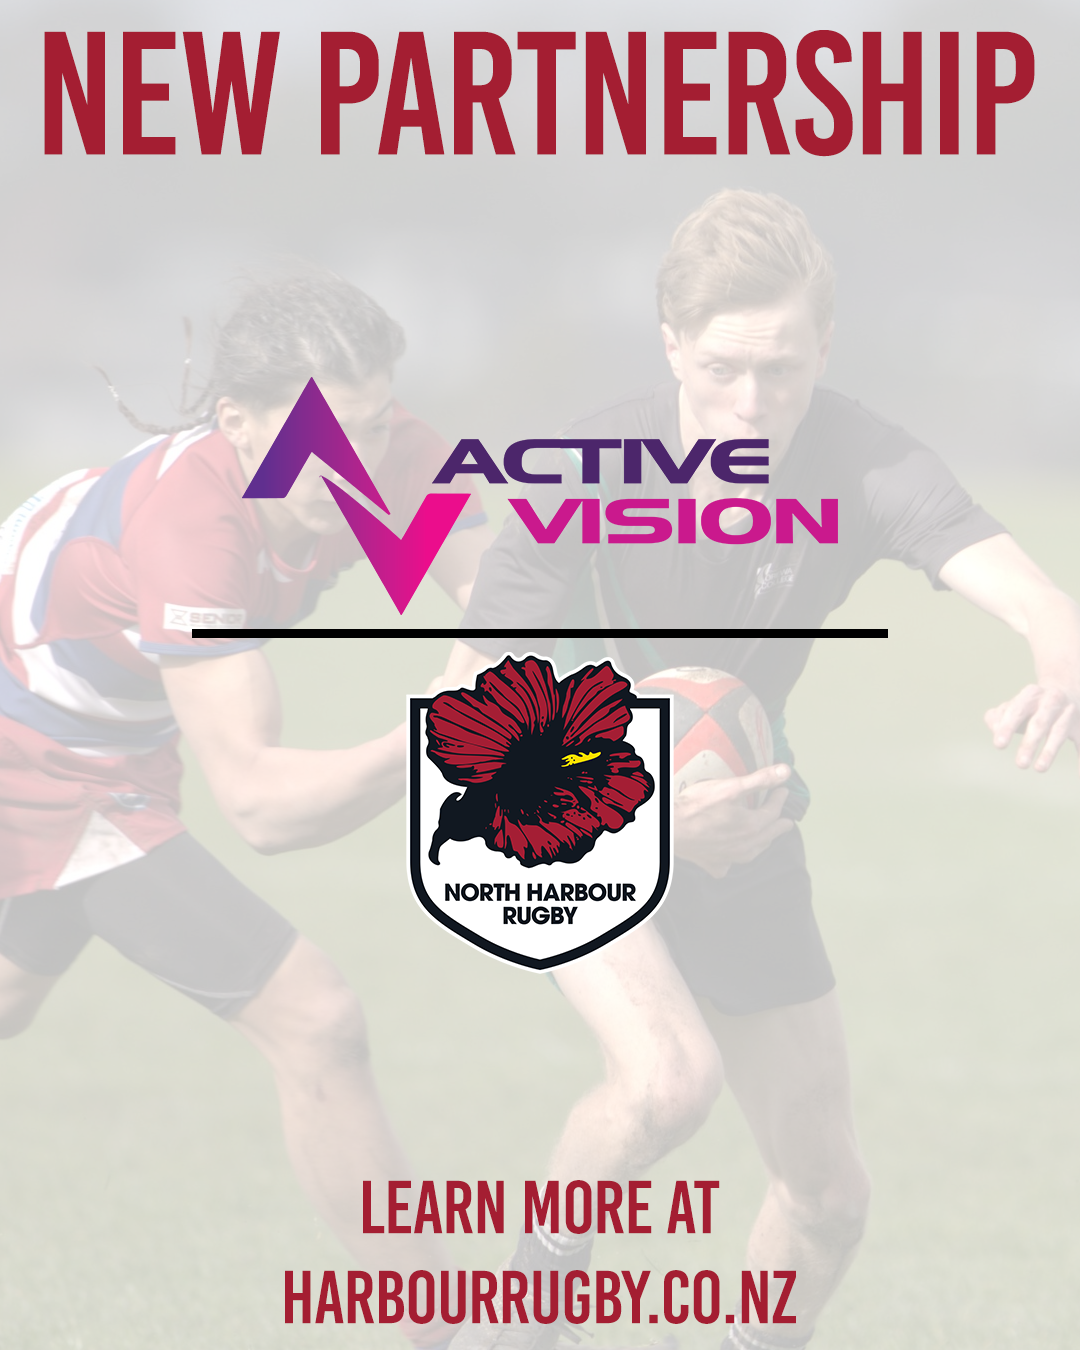 North Harbour Rugby Announces Partnership with ActiveVision